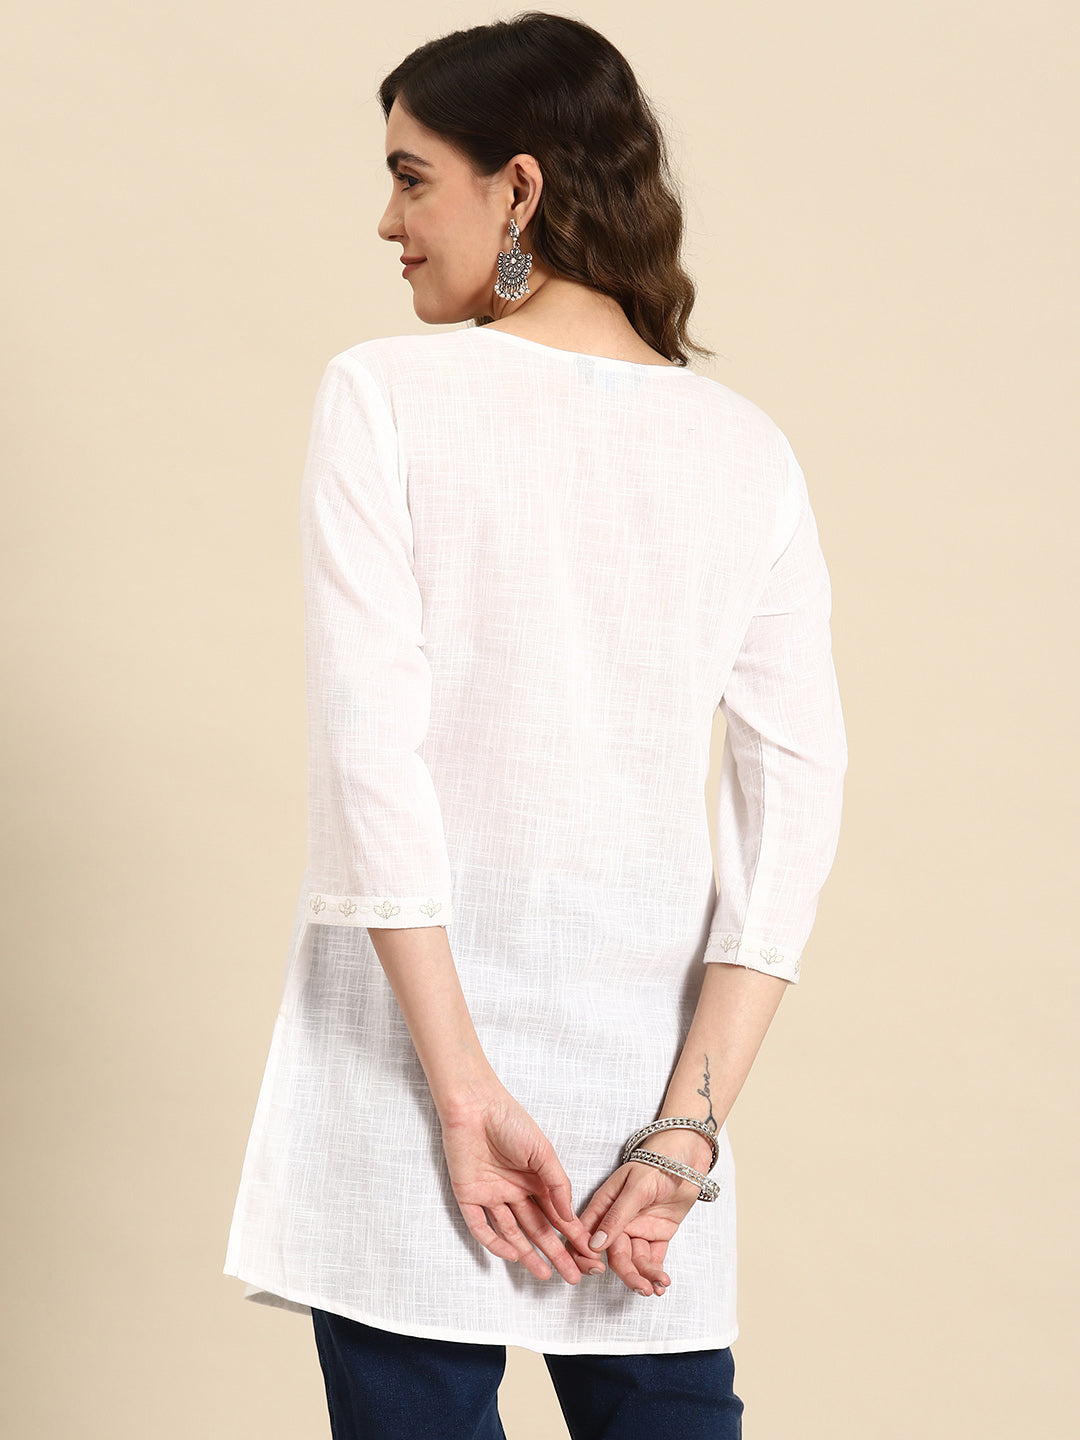 Women's Off-White Embroidered Straight Tunic With Three Quaretr Sleeves - Nayo Clothing